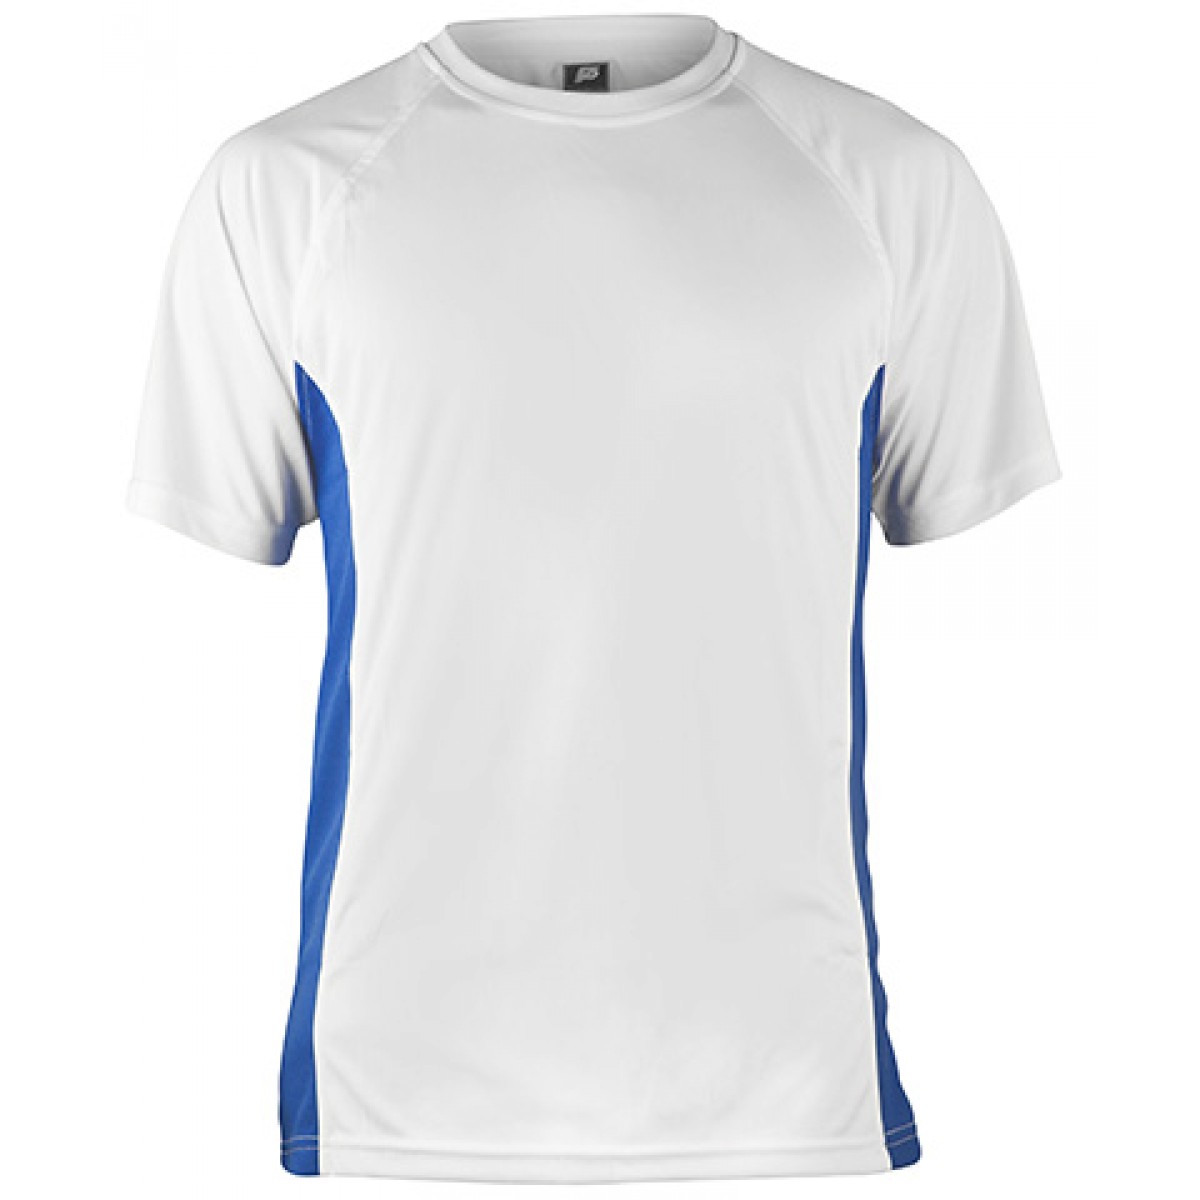 Short Sleeve White Performance With Blue Side Insert